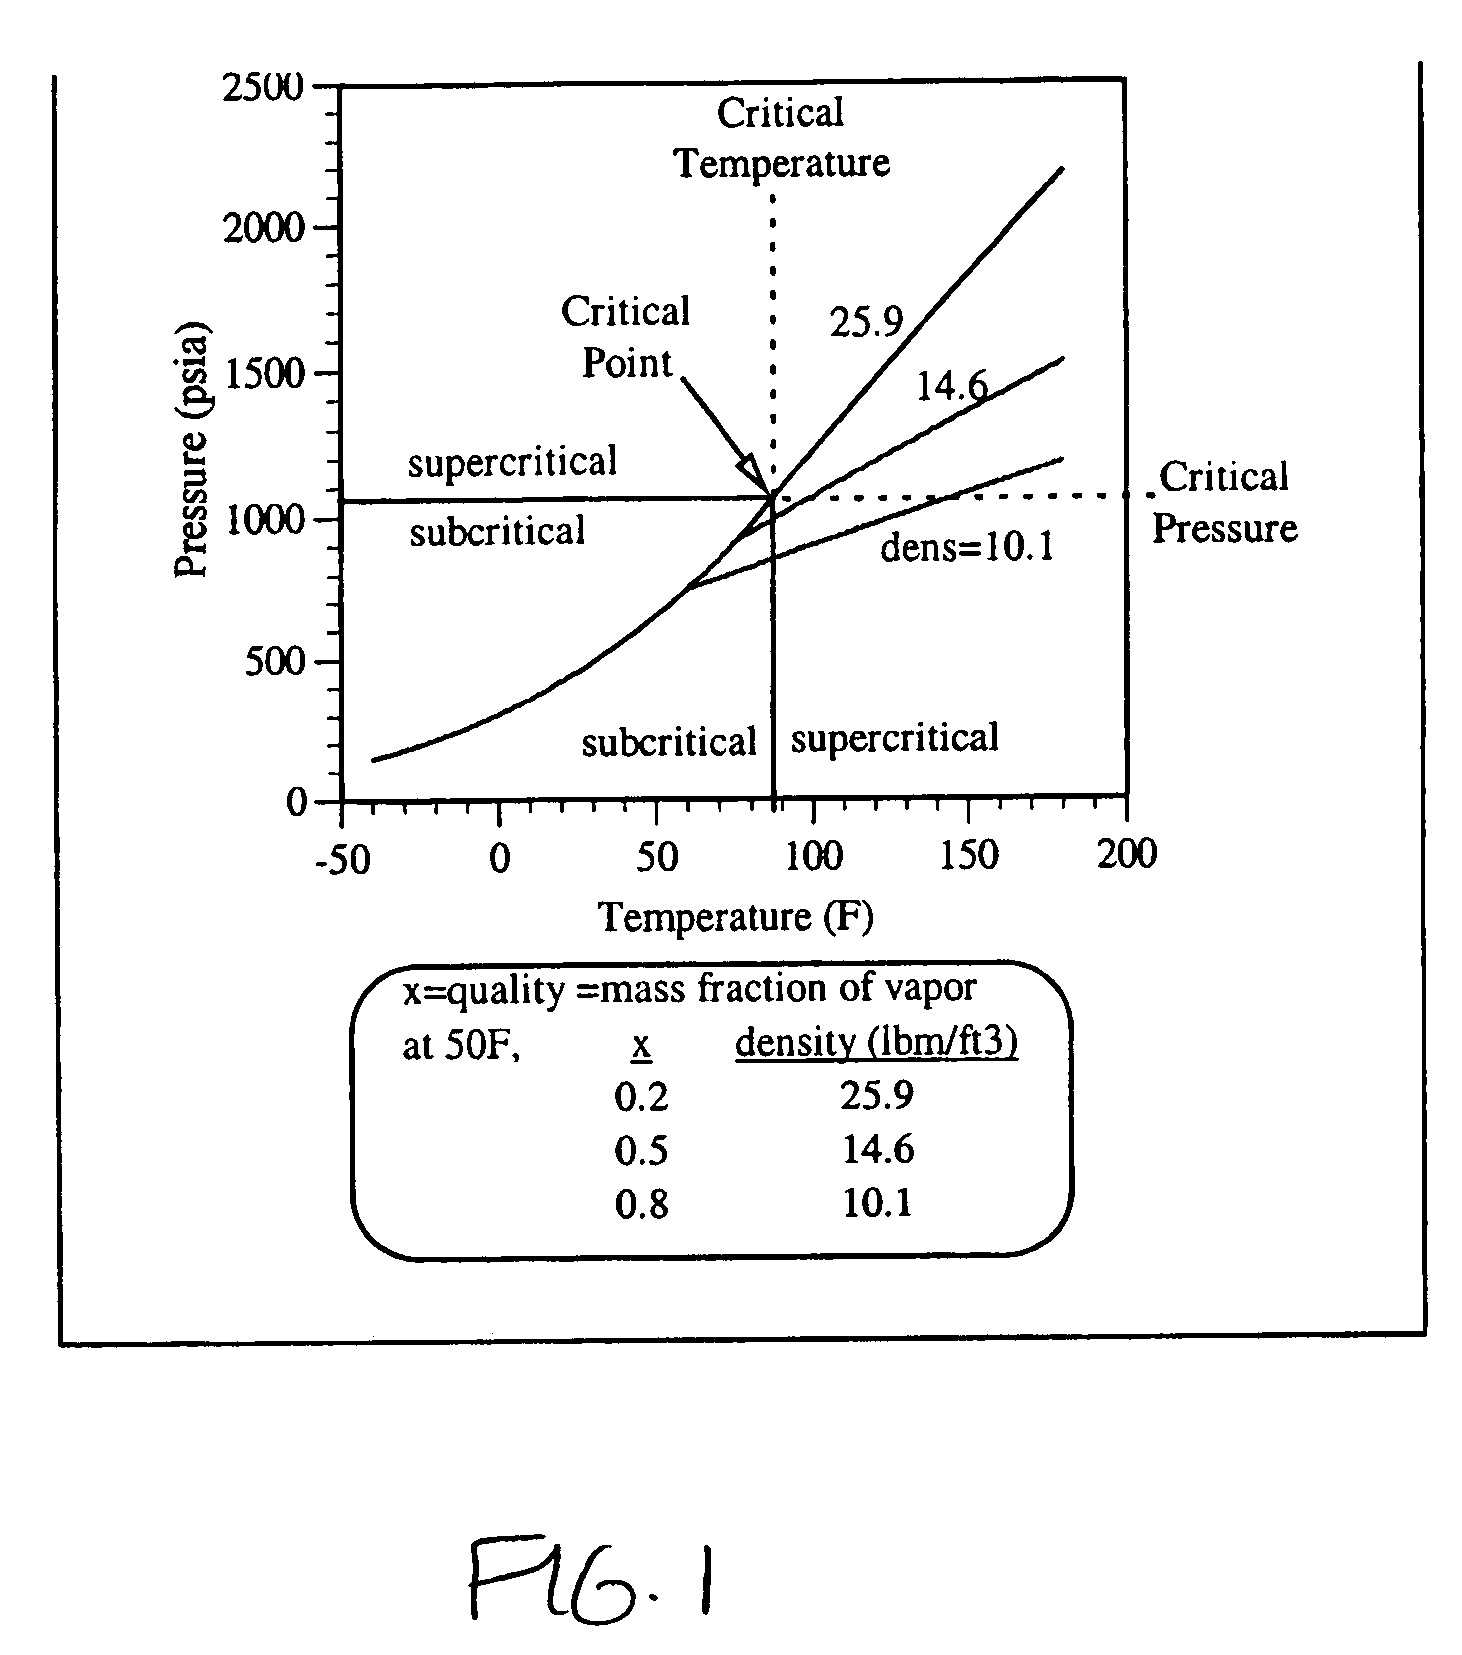 Vapor compression systems using an accumulator to prevent over-pressurization